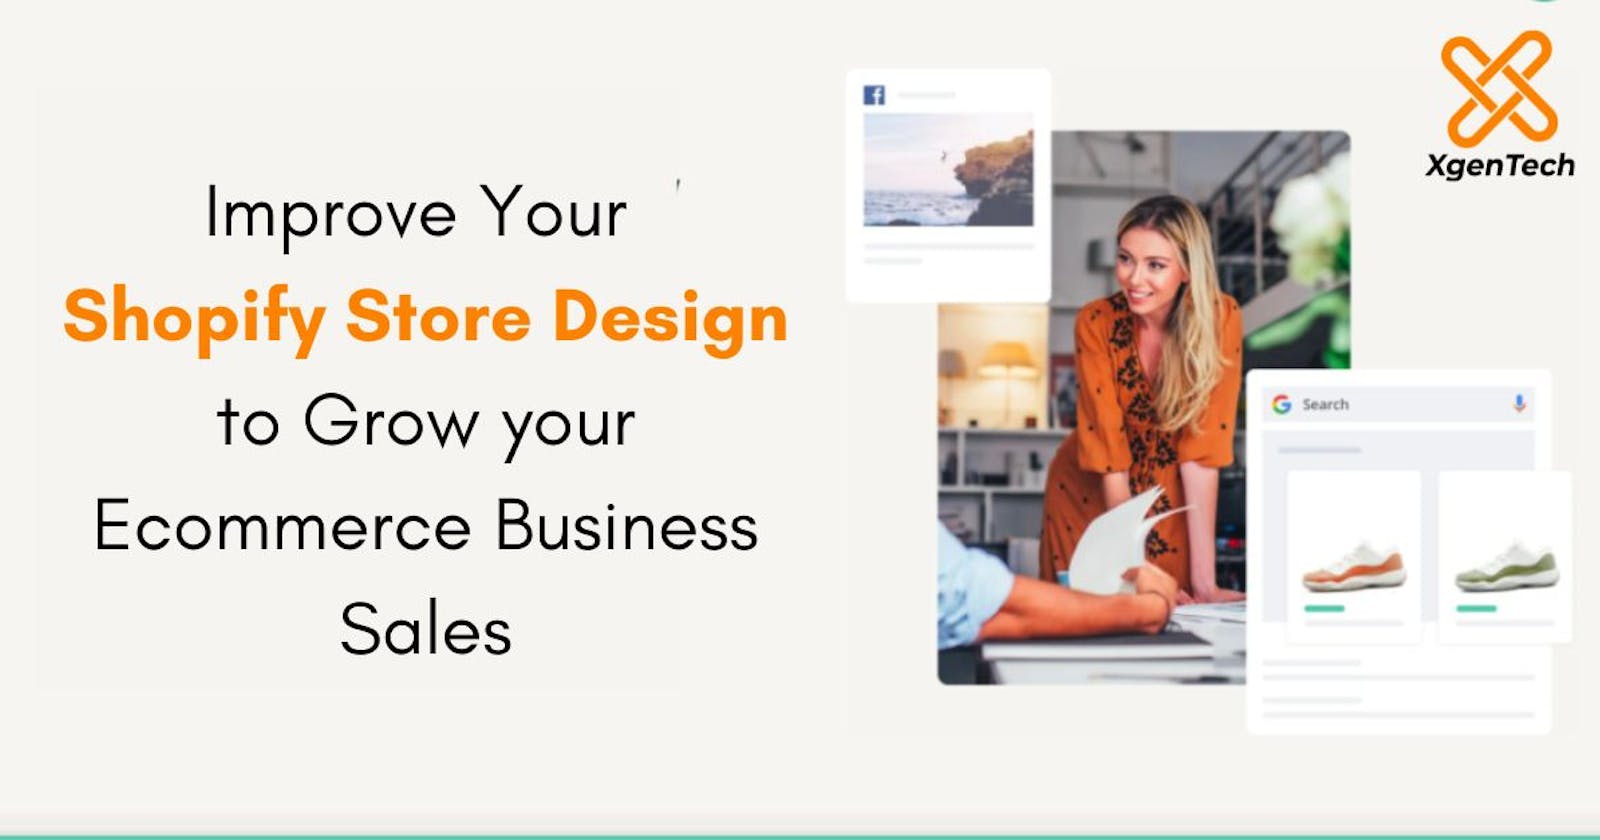 Improve Your Shopify Store Design to Grow your Ecommerce Business Sales